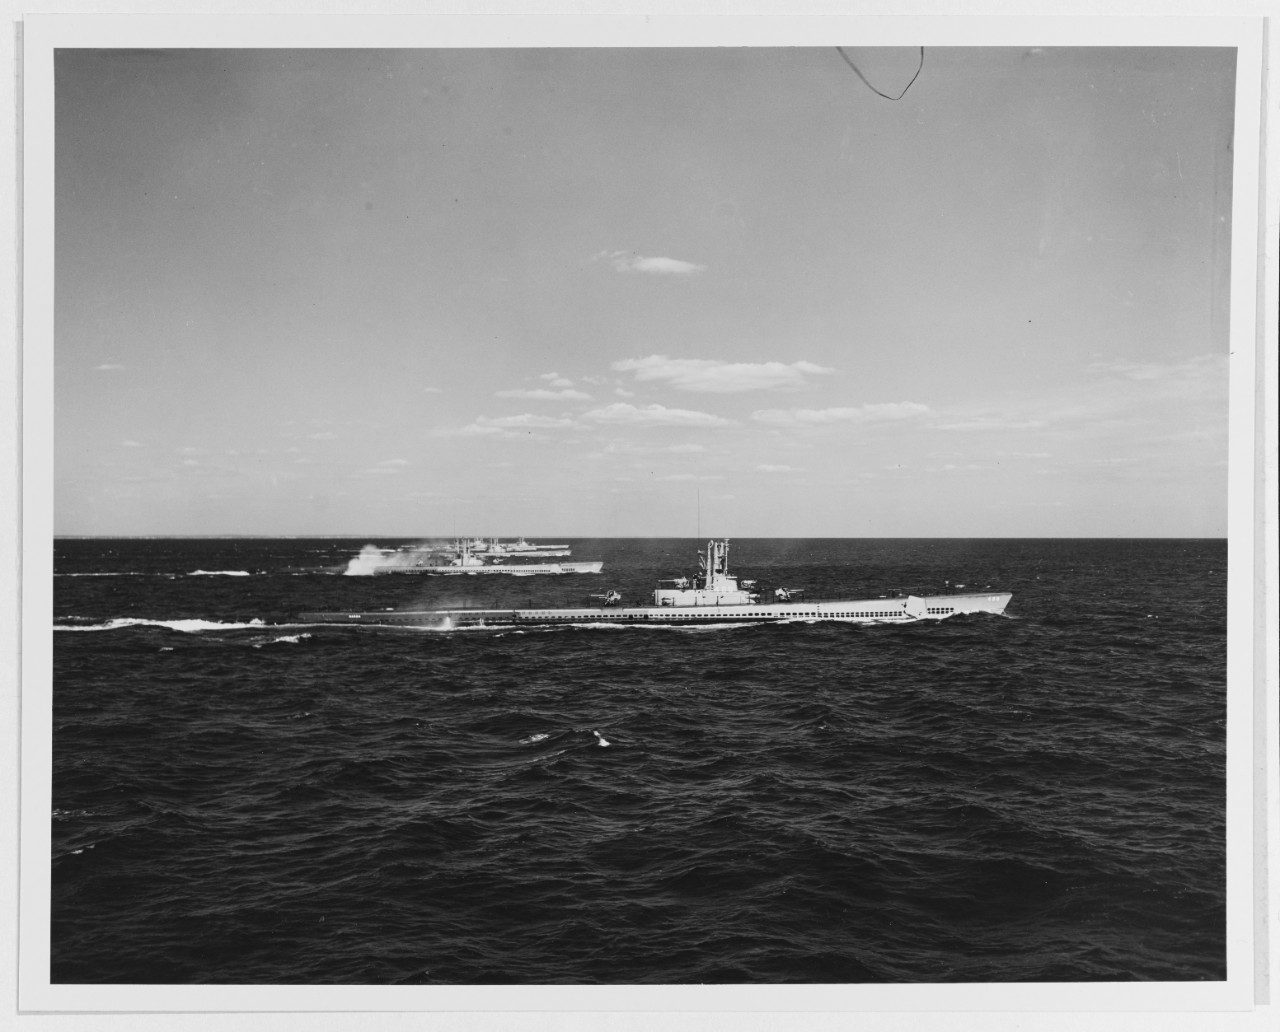 USS SARDA (SS-488), USS TORSK (SS-423), and other submarines